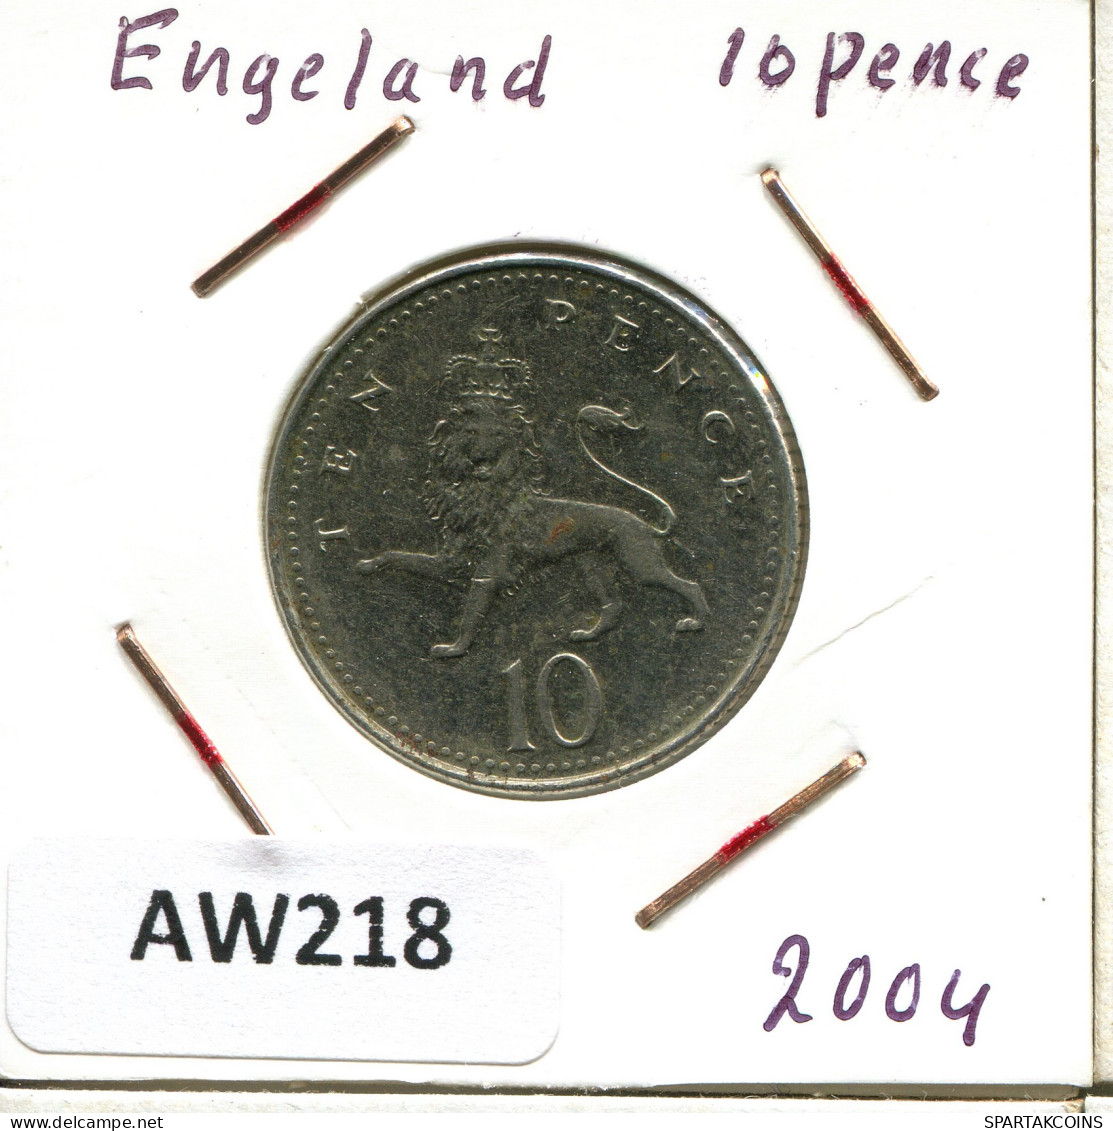 10 PENCE 2004 UK GRANDE-BRETAGNE GREAT BRITAIN Pièce #AW218.F - 10 Pence & 10 New Pence